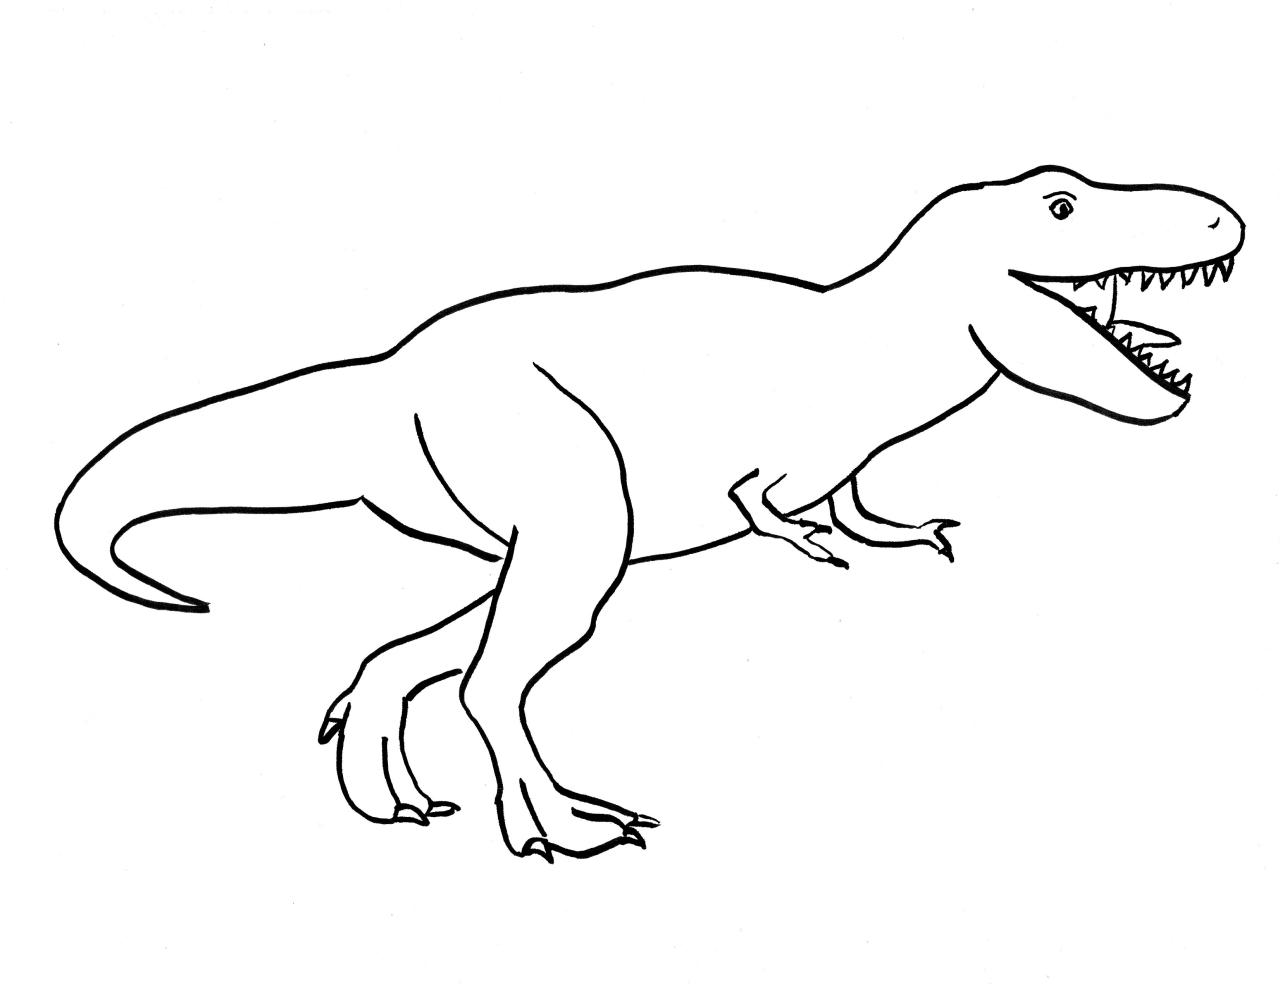 TRex Drawing Step By Step Art Starts for Kids